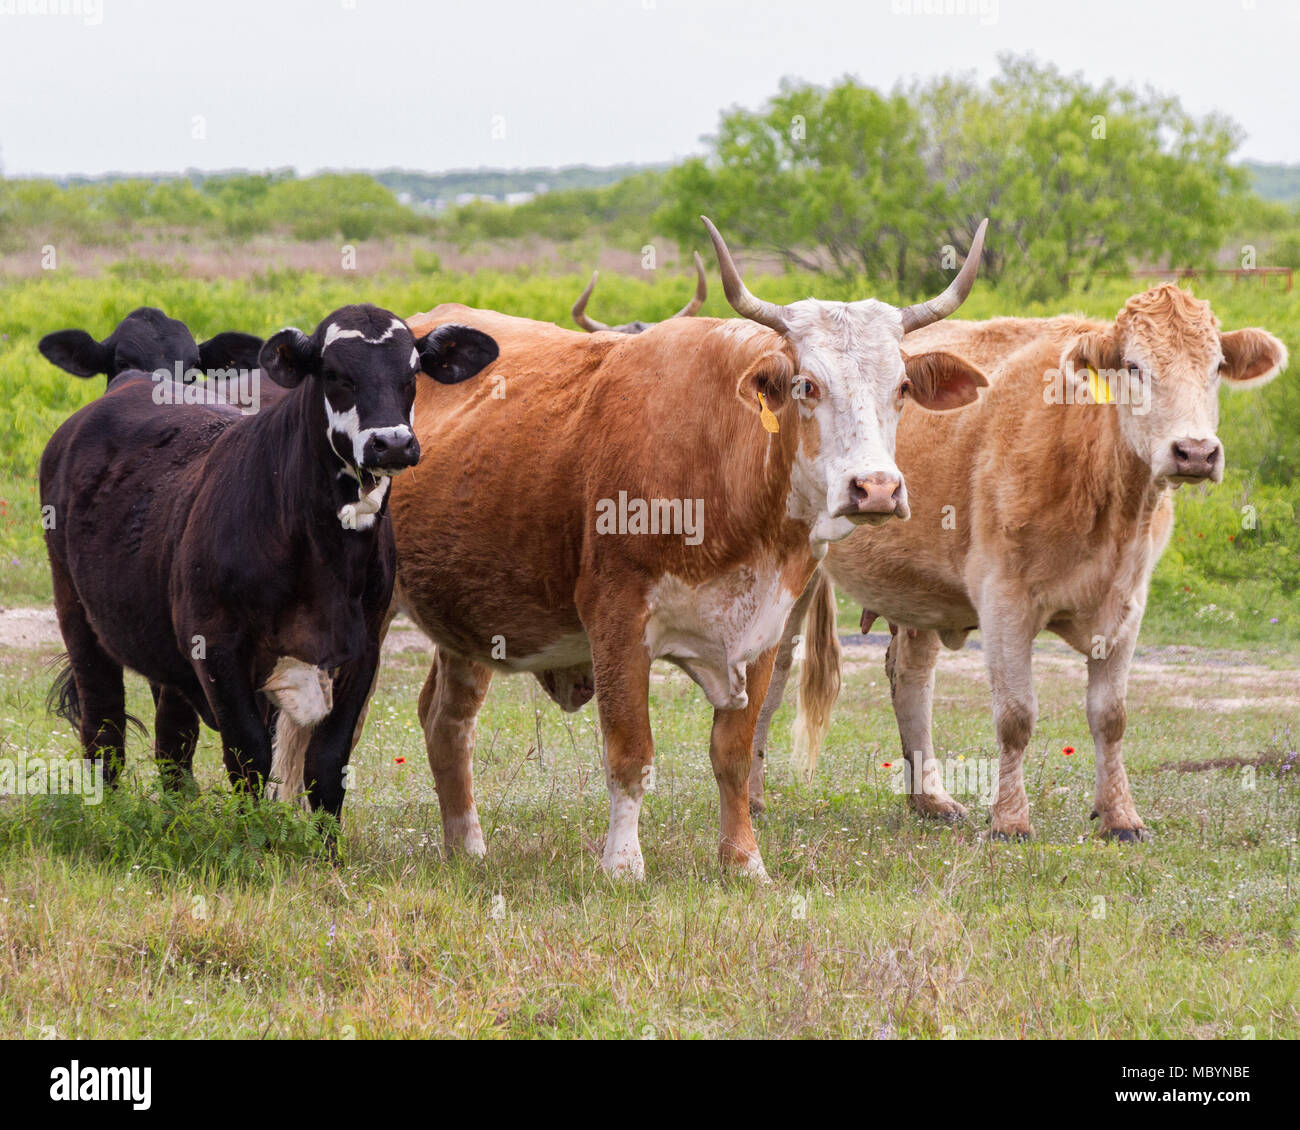 South Texas range cattle that have been crossed with Brahman cattle. Stock Photo